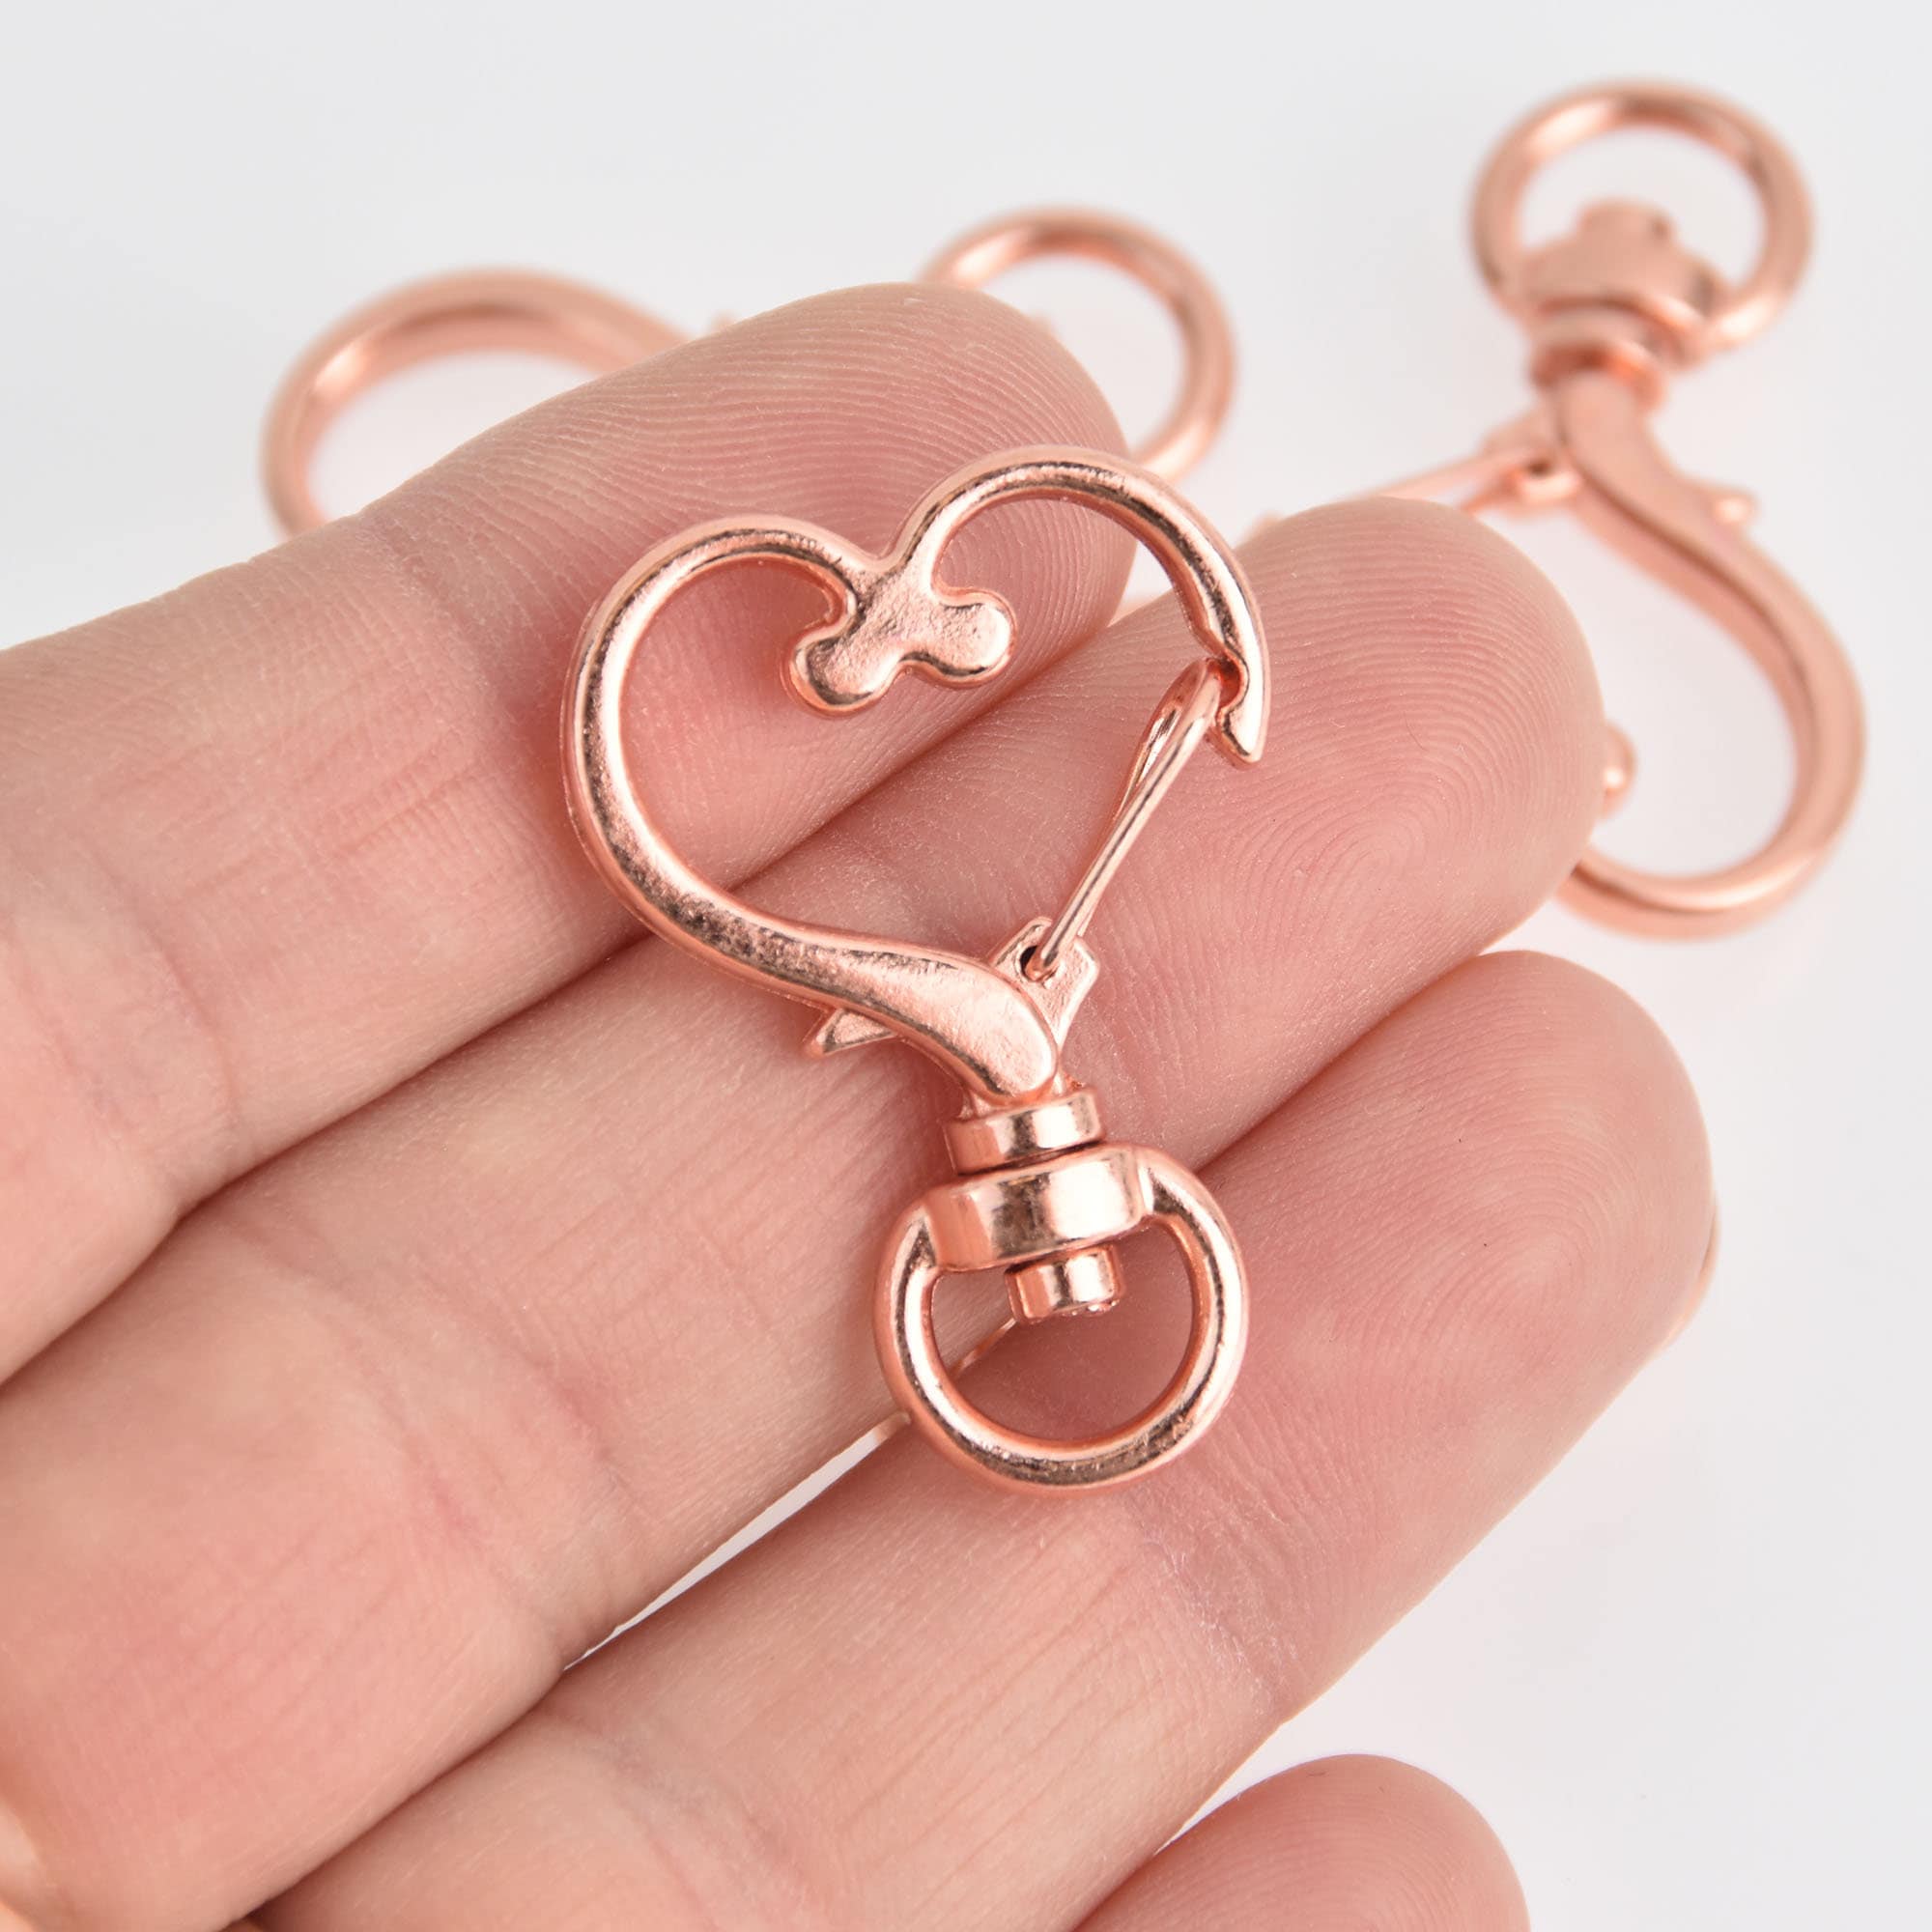 5 Rose Gold Key Chains With Heart Clasp, Swivel Lobster Key Chain